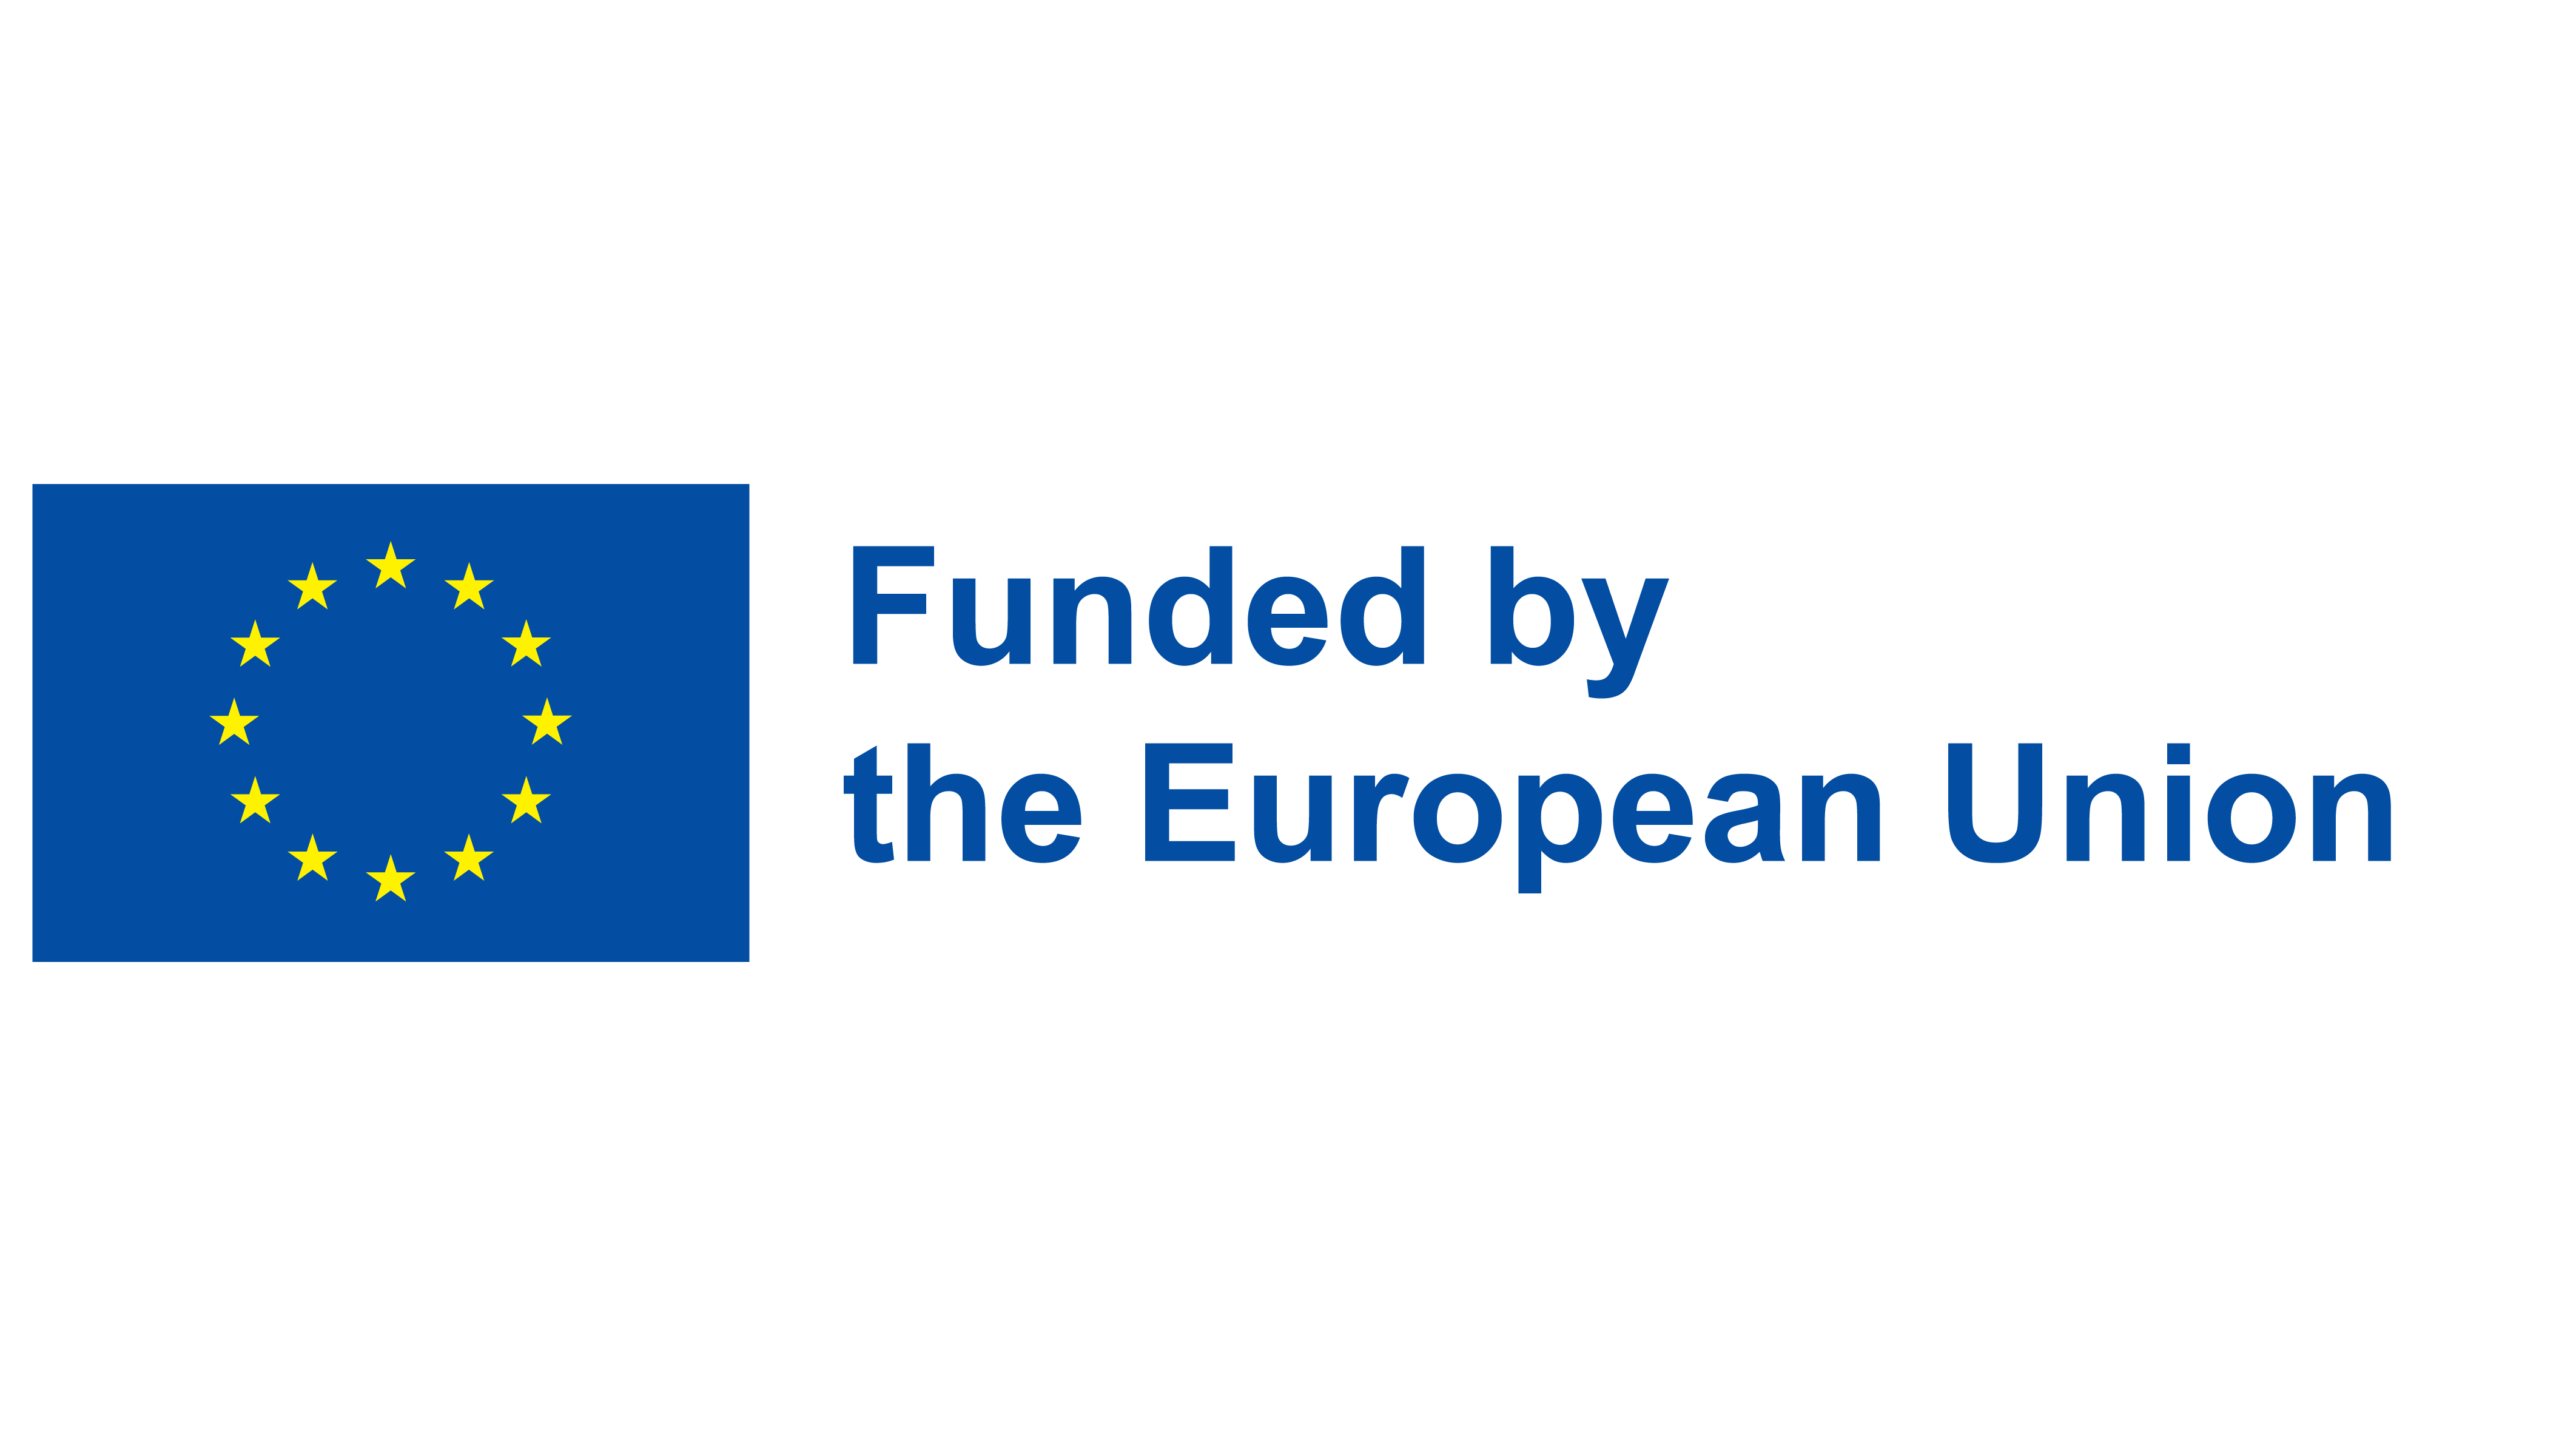 Flag of the European Union and text saying: 'Funded by the European Union'